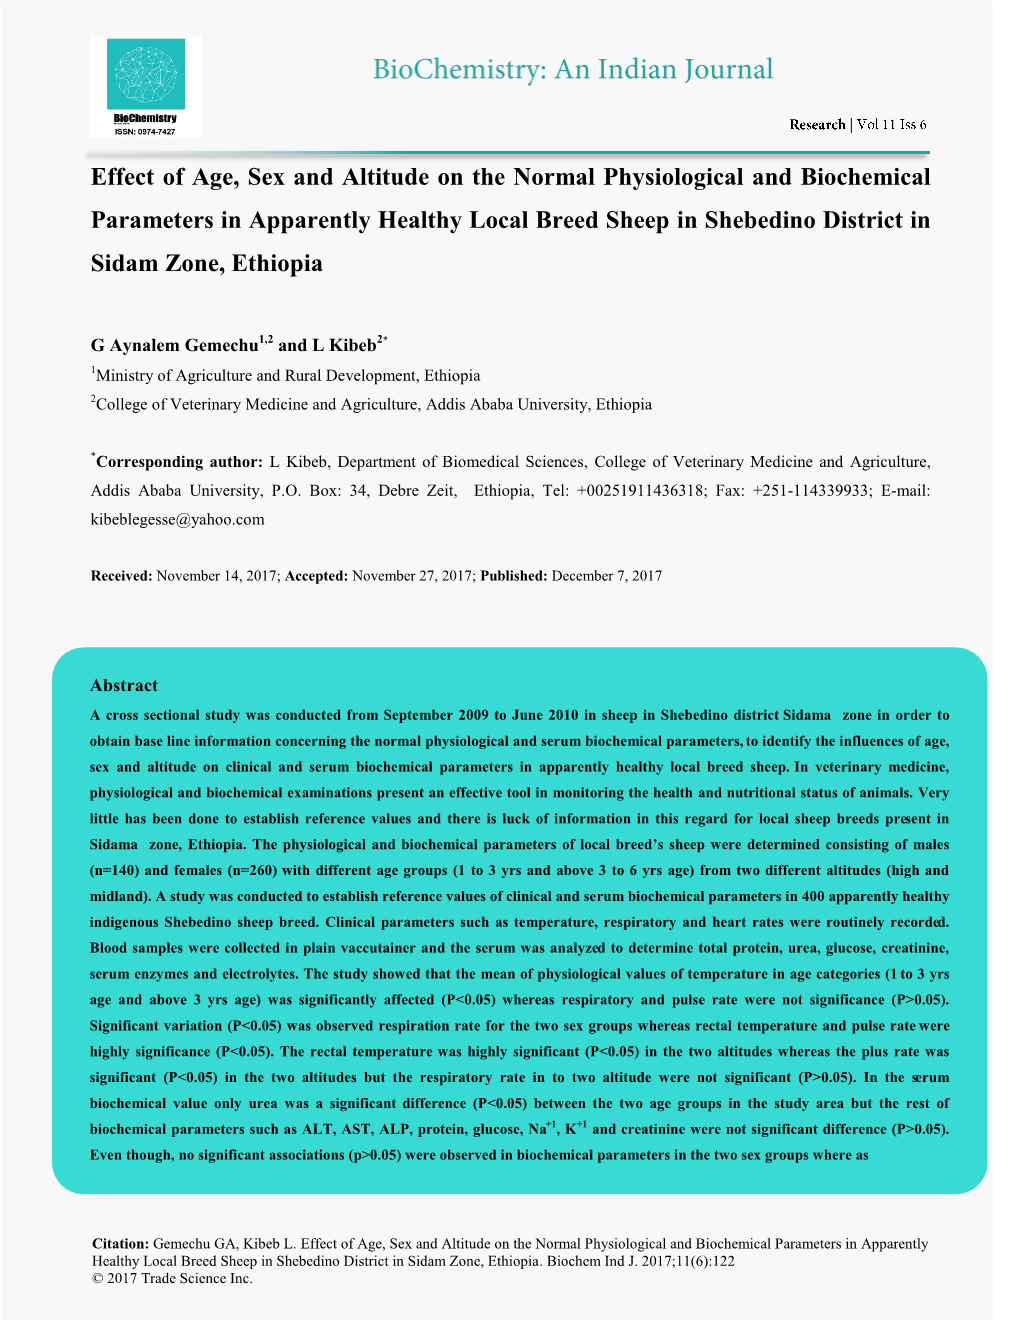 Effect of Age, Sex and Altitude on the Normal Physiological And